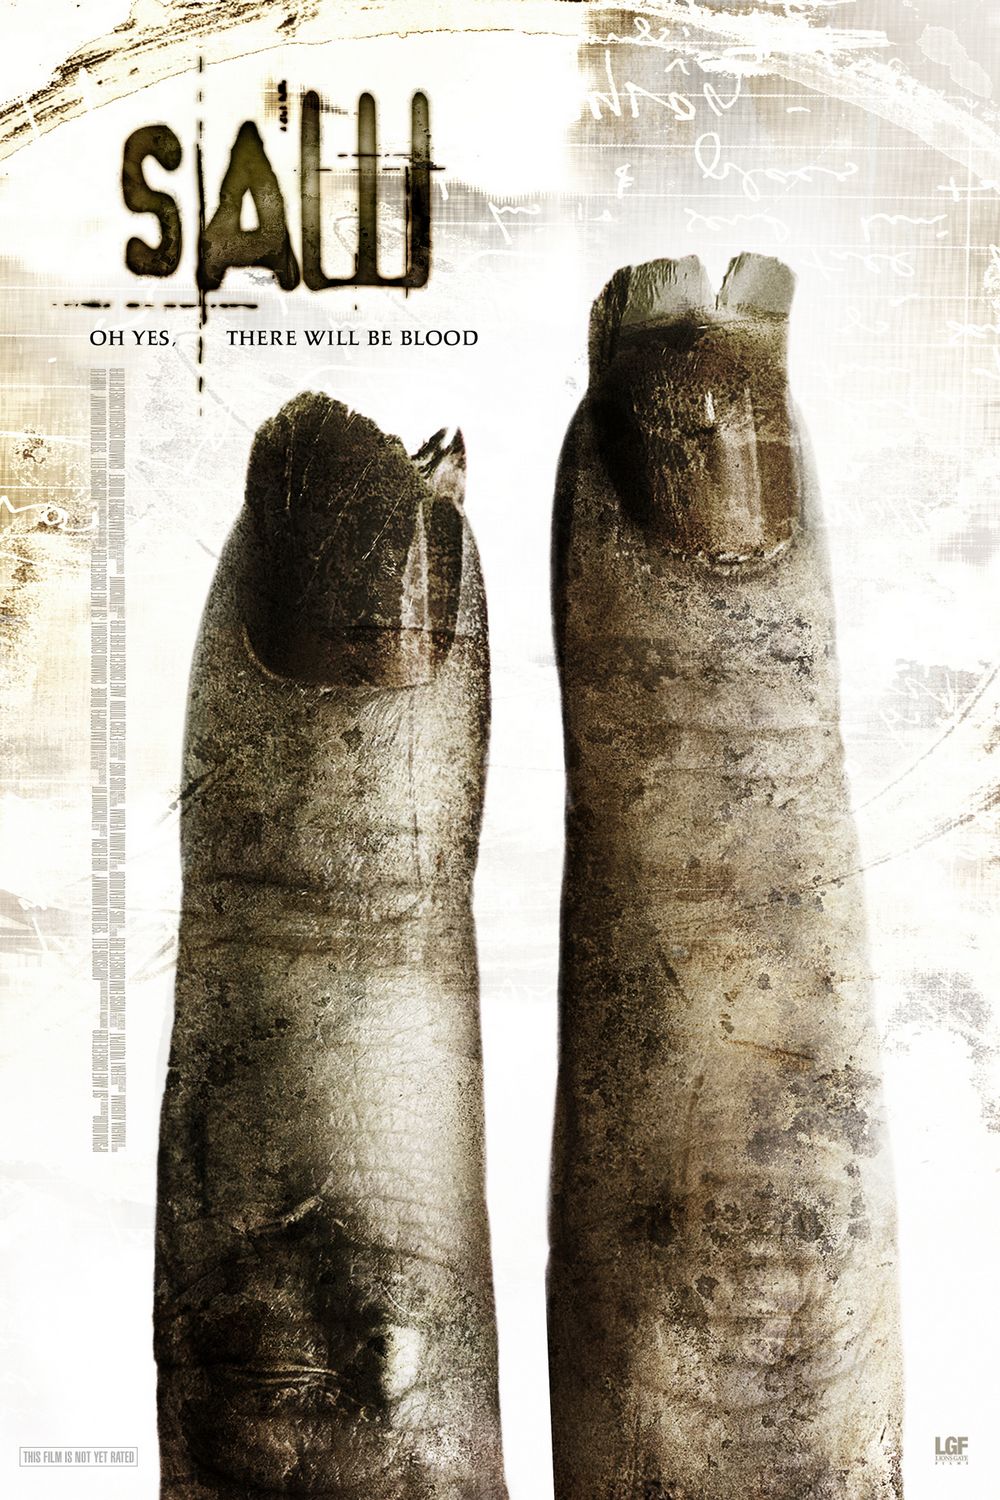 Extra Large Movie Poster Image for Saw II (#2 of 10)